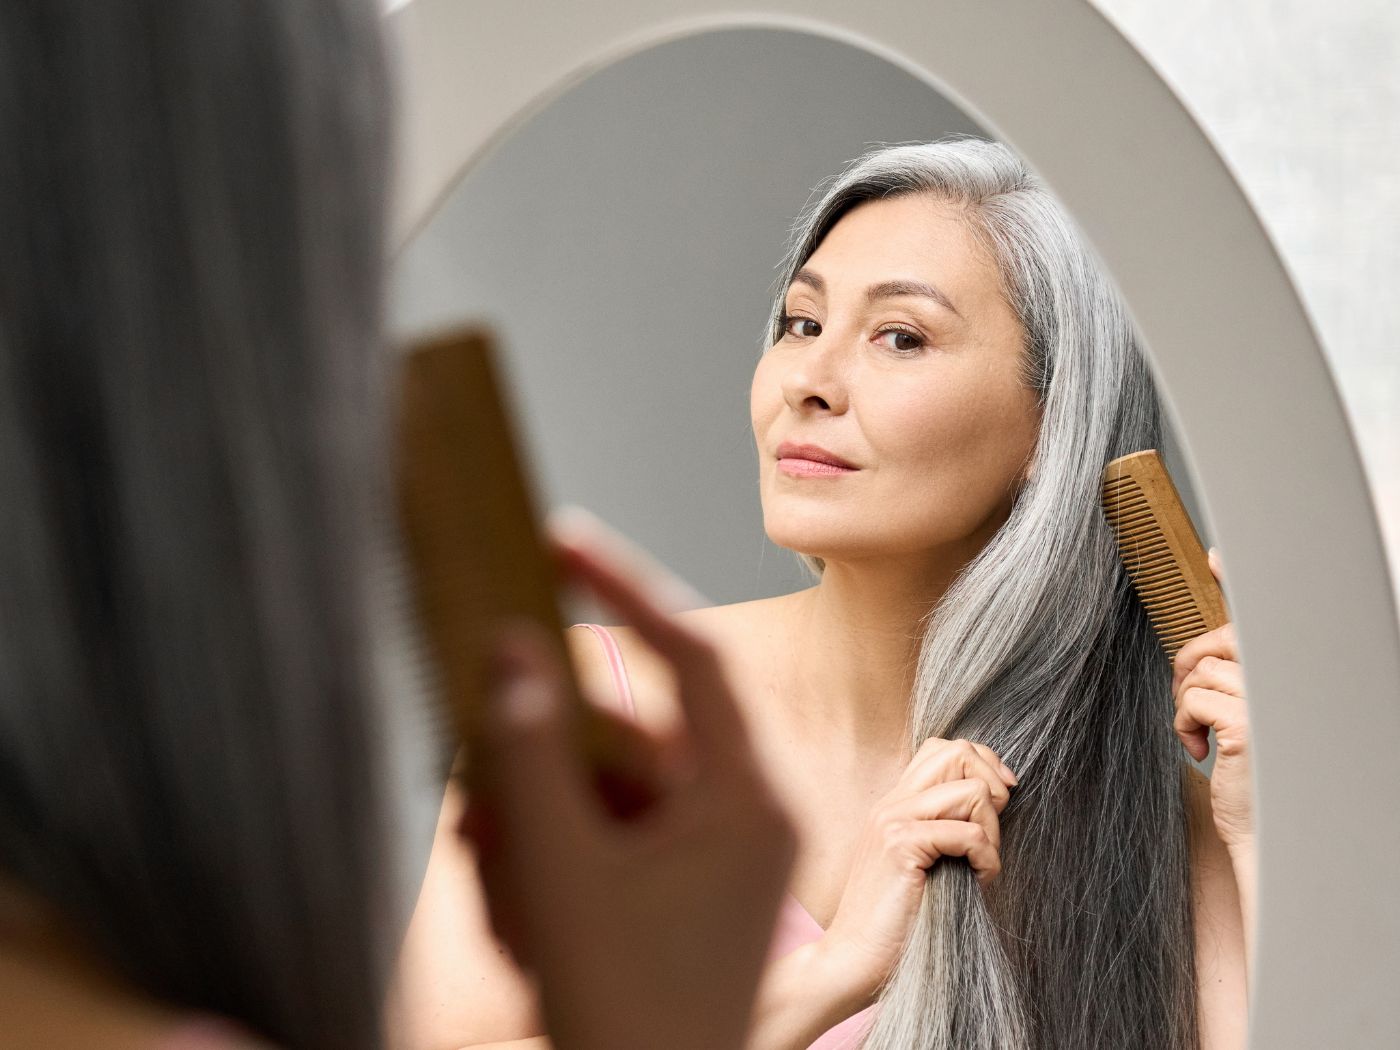 Woman brushing her long, gray hair in the mirror